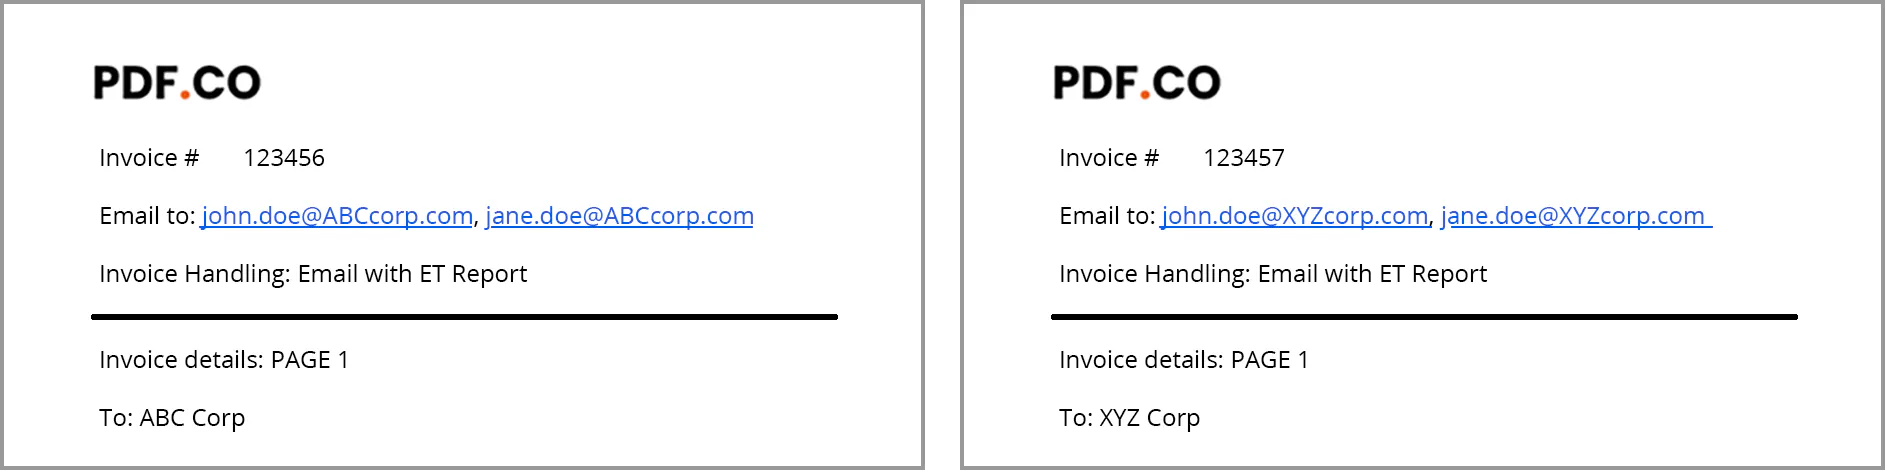 Single page invoices